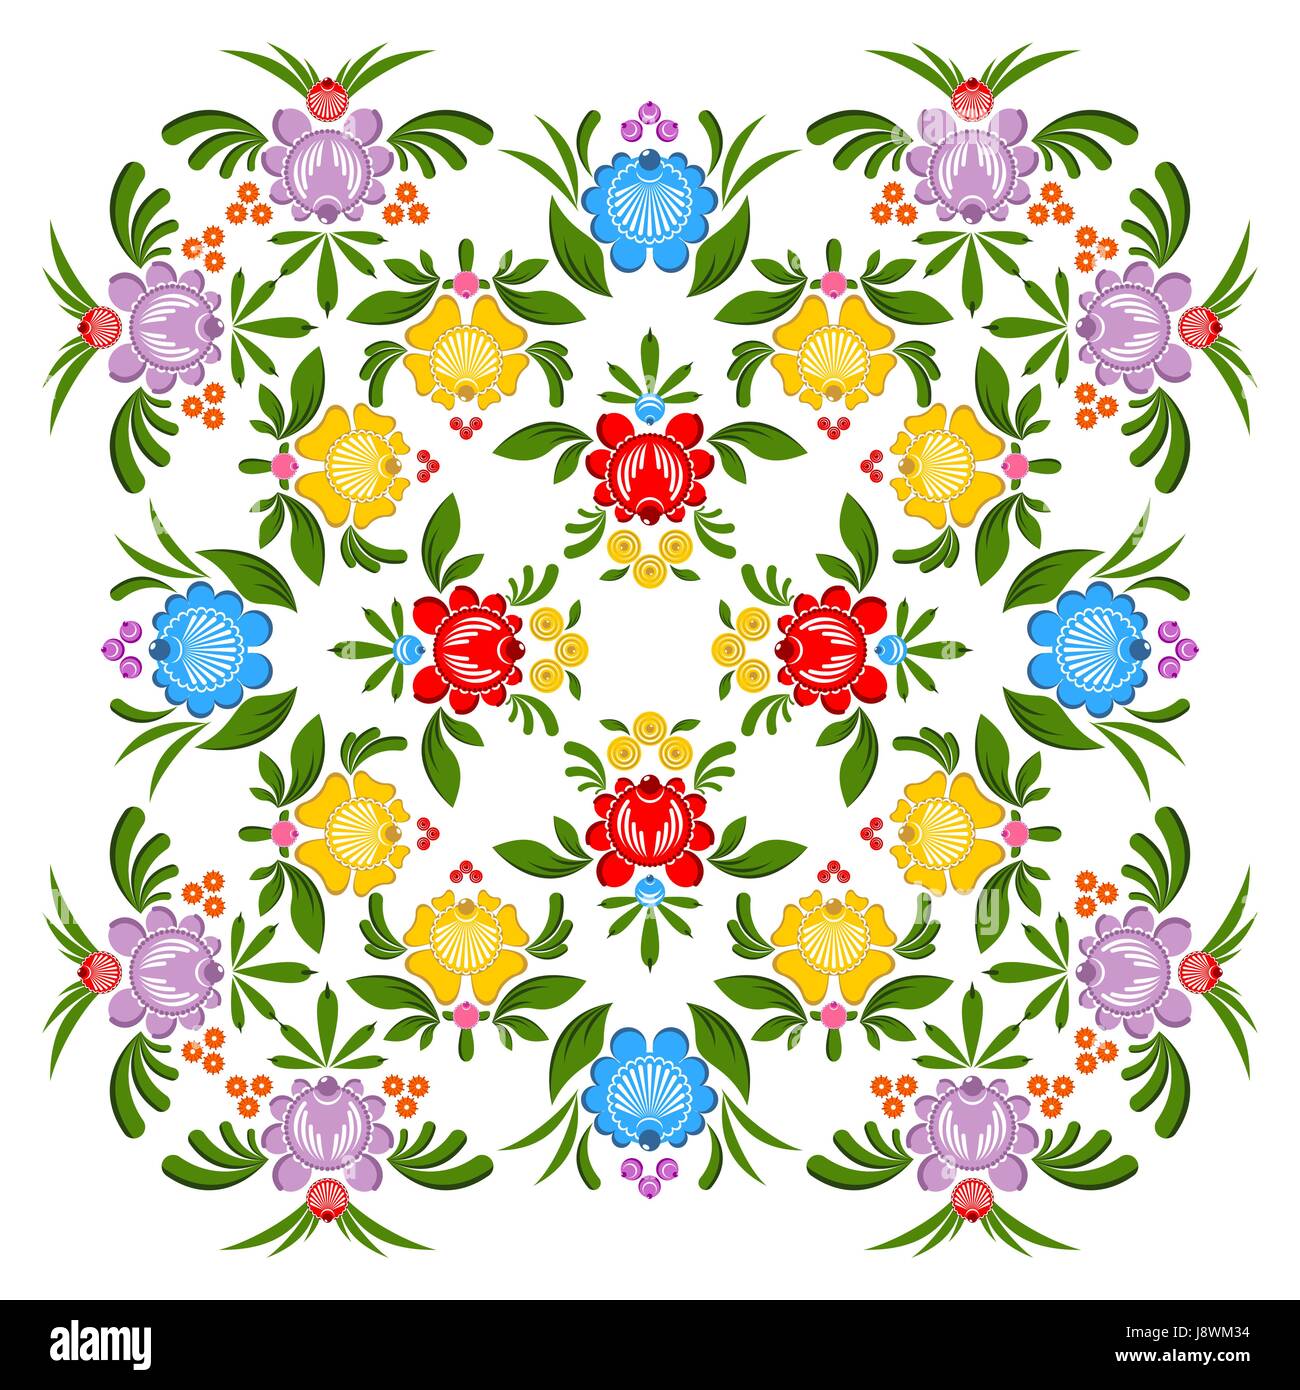 Gorodets painting pattern. Floral ornament. Russian national folk craft. Traditional culture painting in Russia. Retro ethnic decor rose and berry Stock Vector